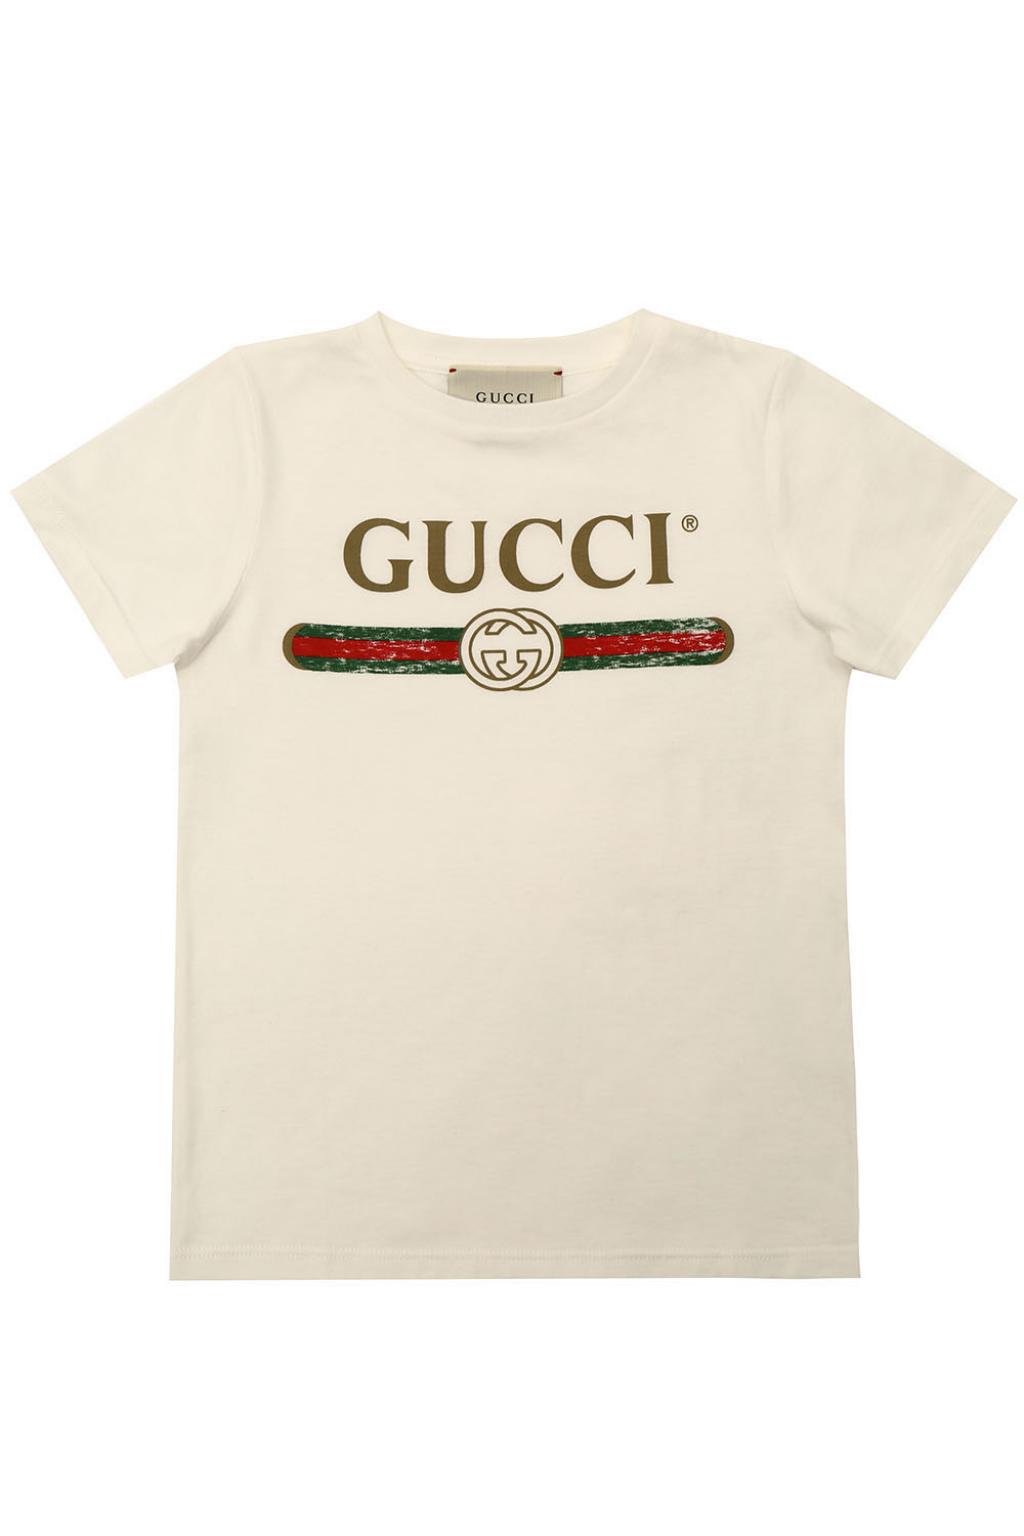 red and green gucci shirt